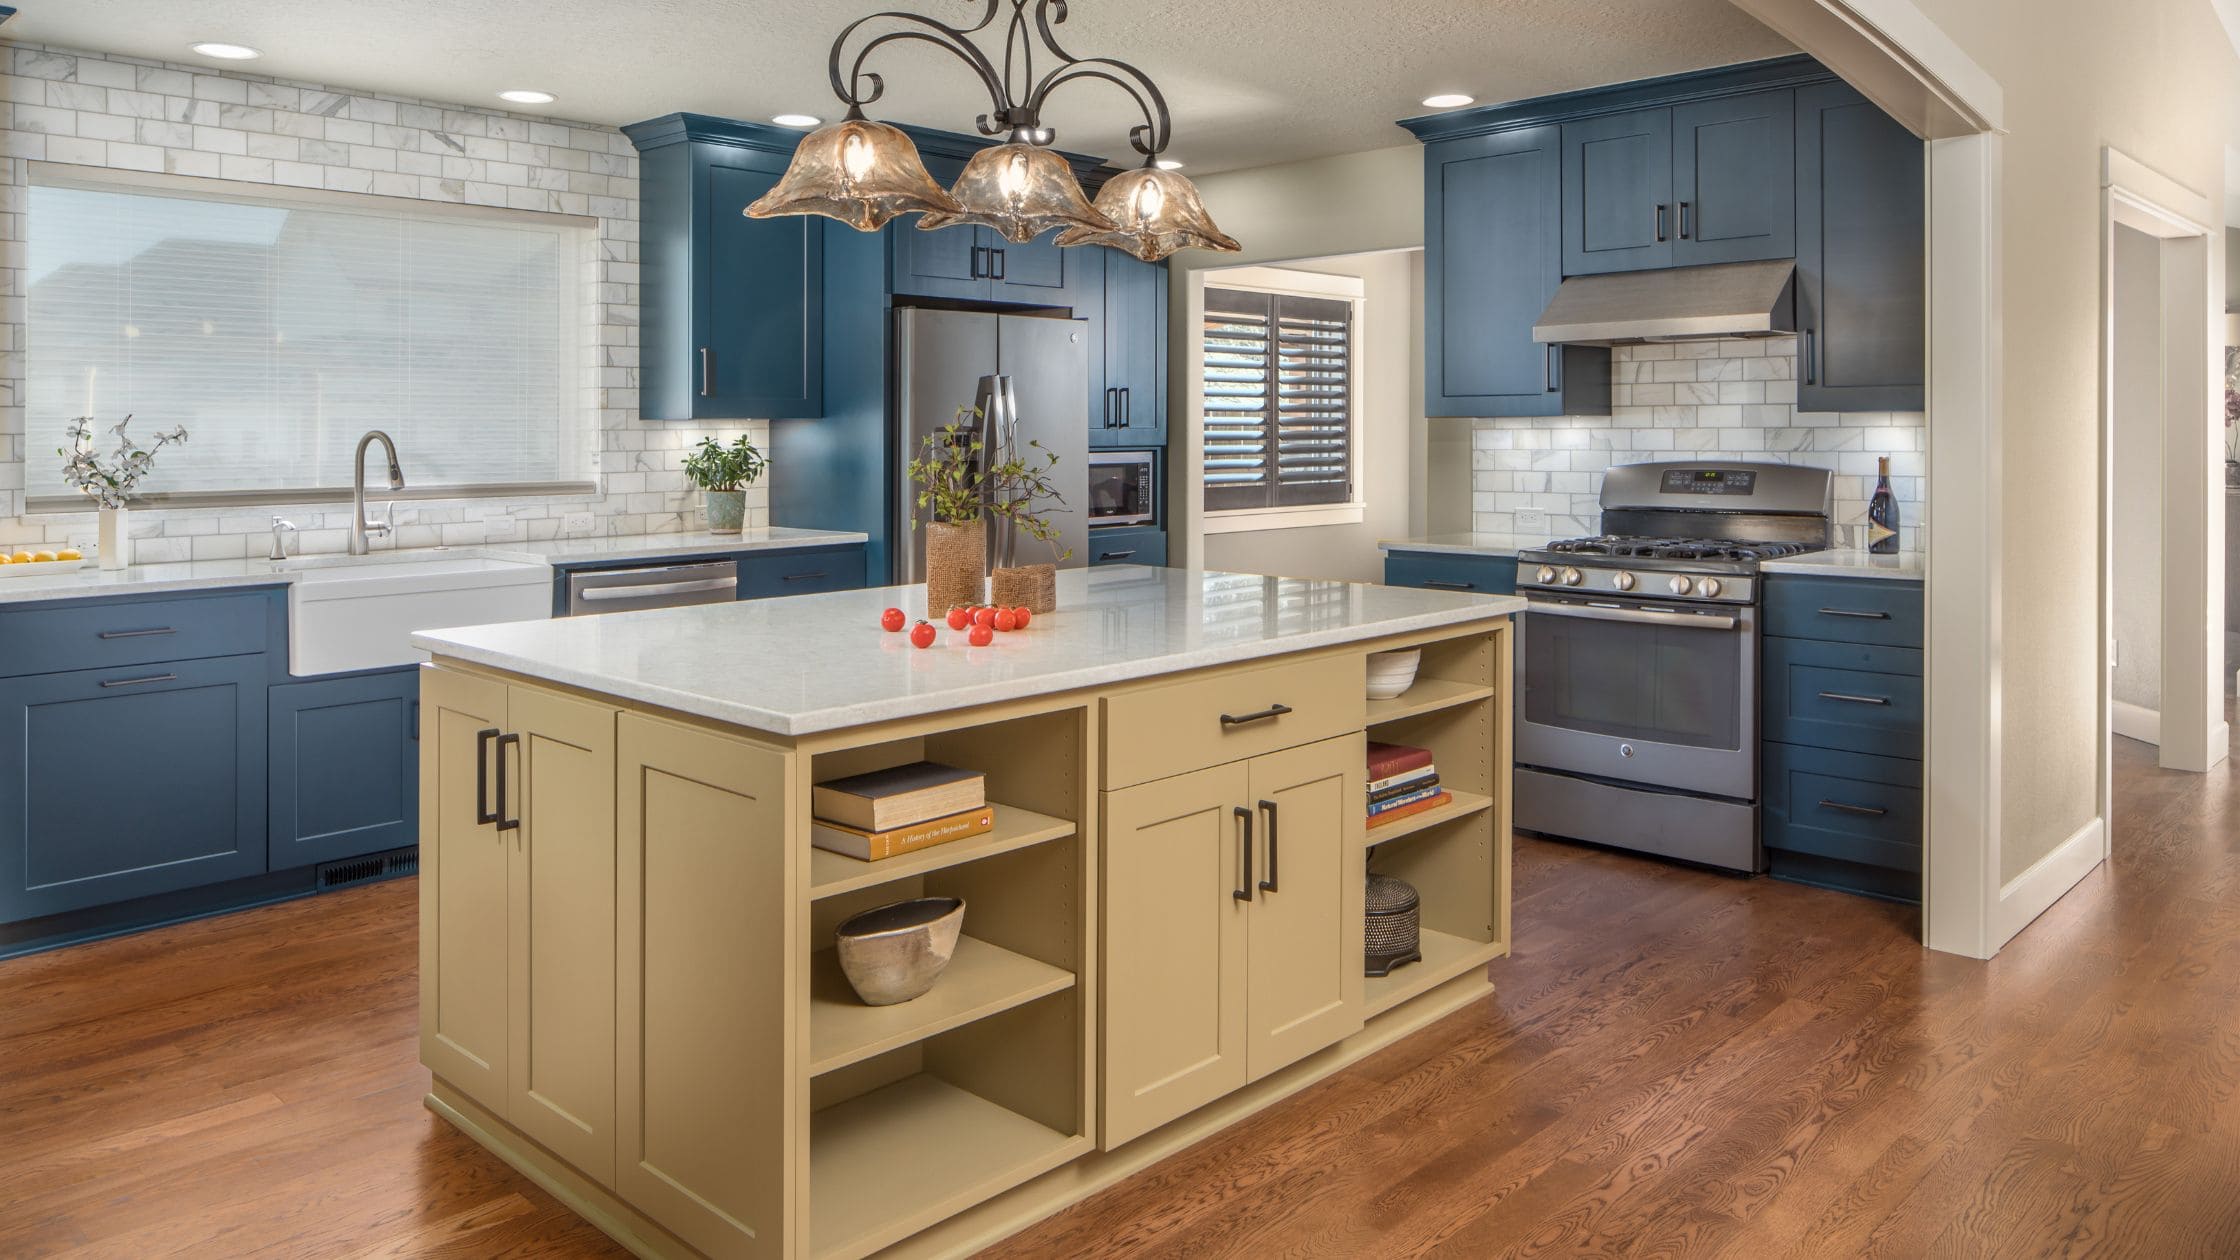 9 Kitchen Trends to Avoid in 2023